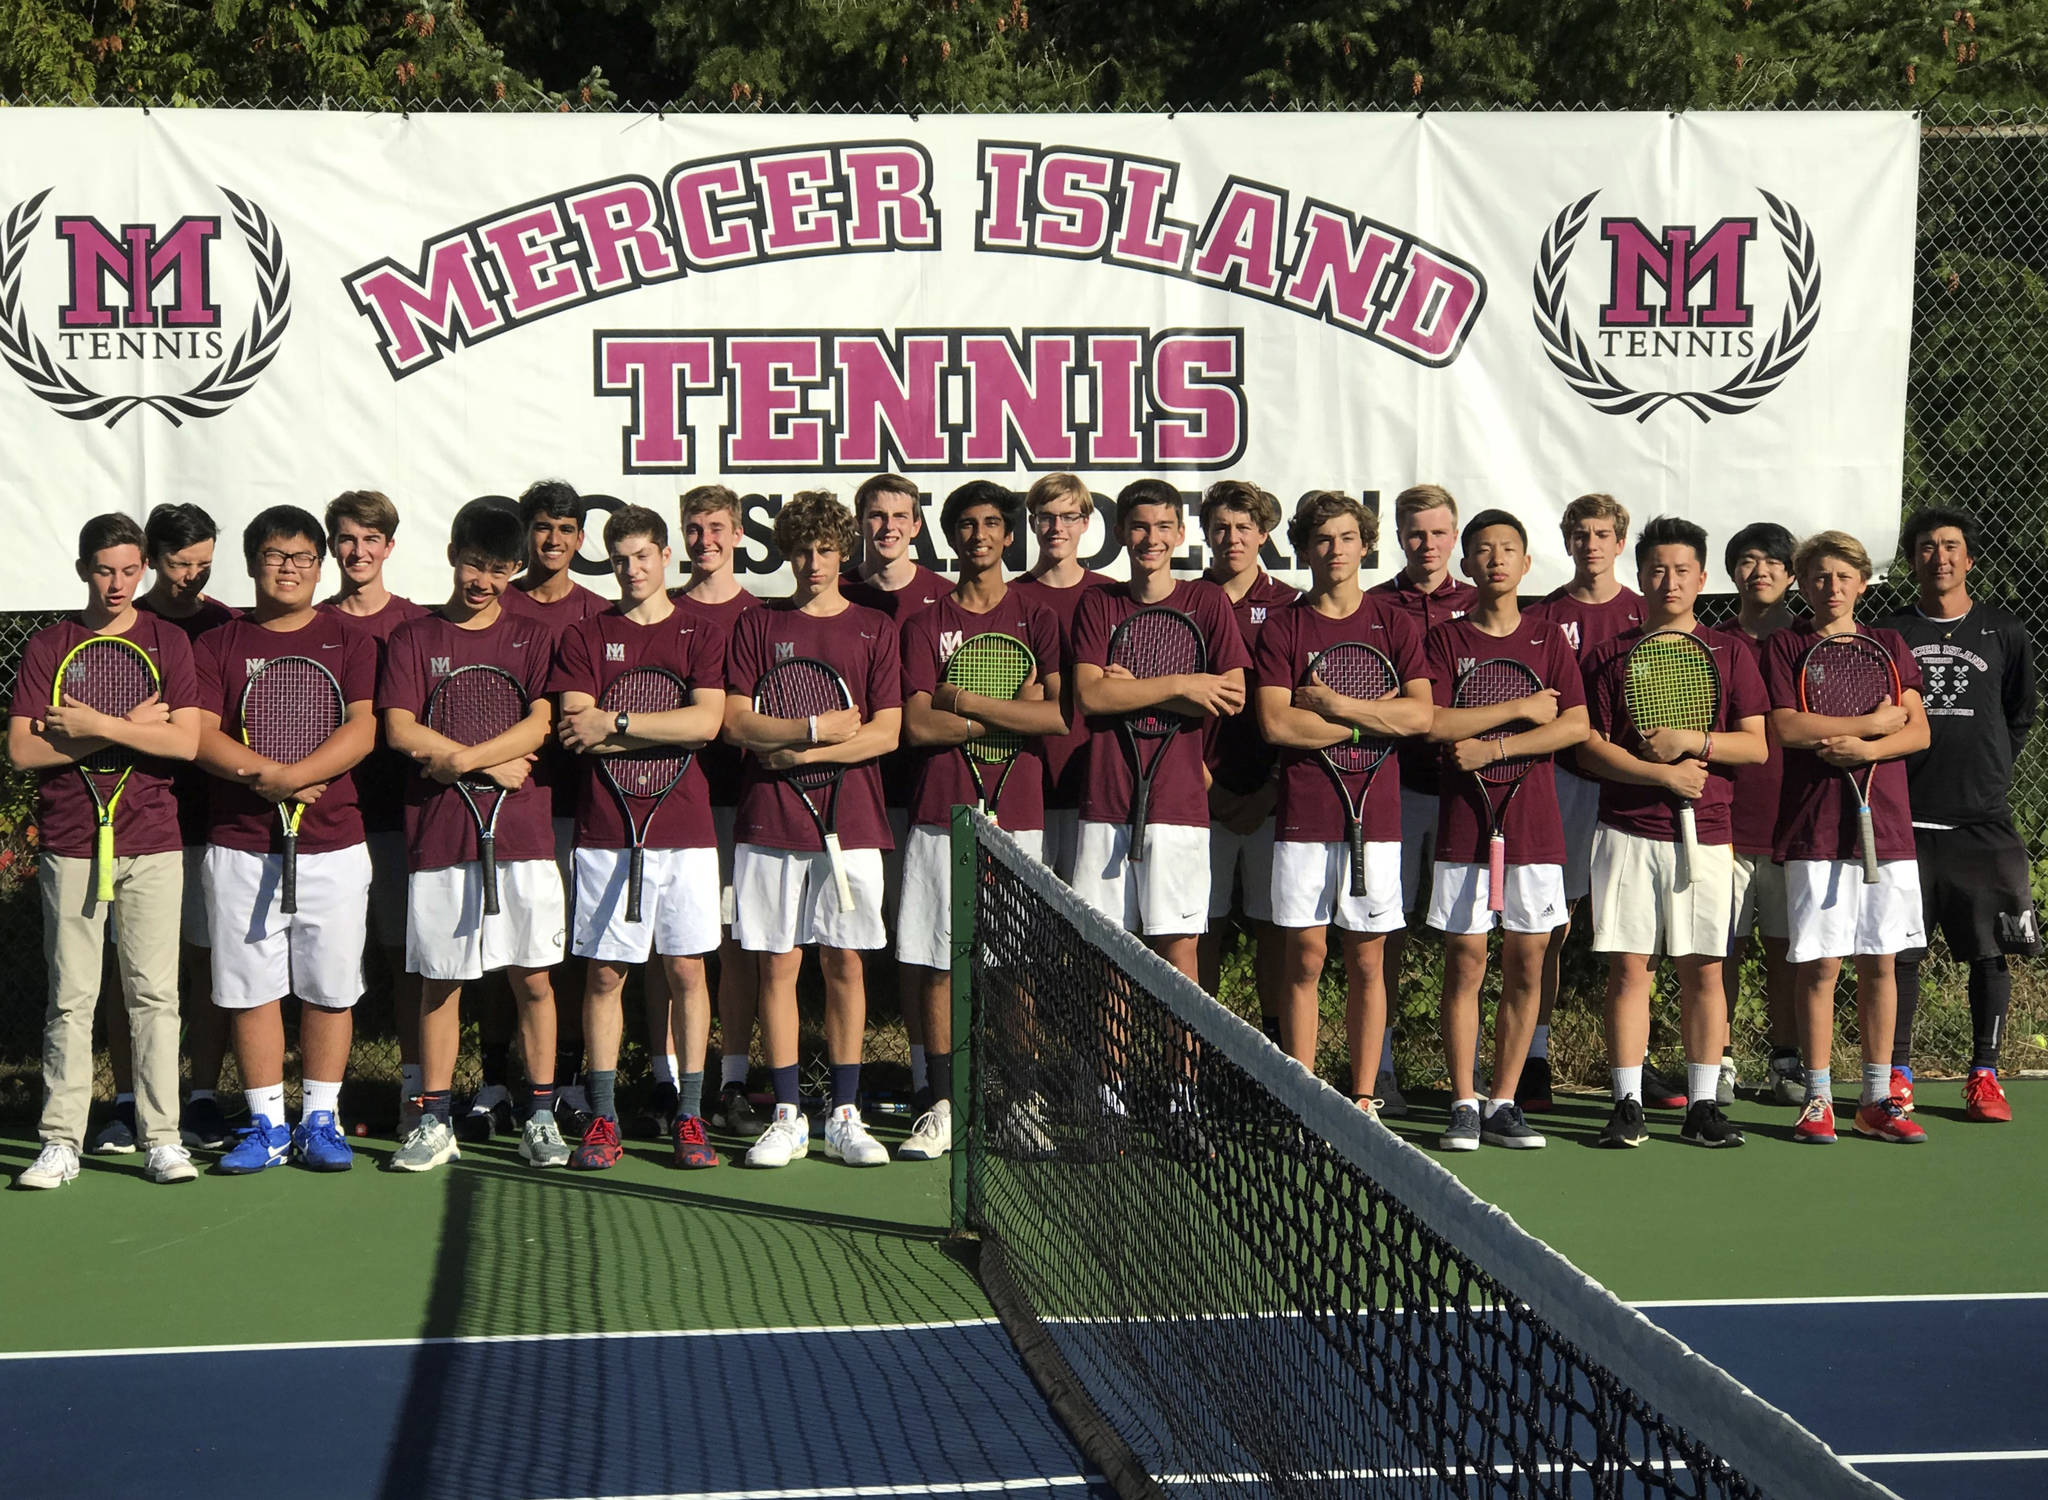 The Mercer Island Islanders boys tennis team earned a 6-1 victory against the Bellevue Wolverines in a 3A/2A KingCo tennis matchup on Sept. 25 on Mercer Island. The Islanders improved their overall record to 8-1 (4-0 league) with the victory. Photo courtesy of Anjali Patel